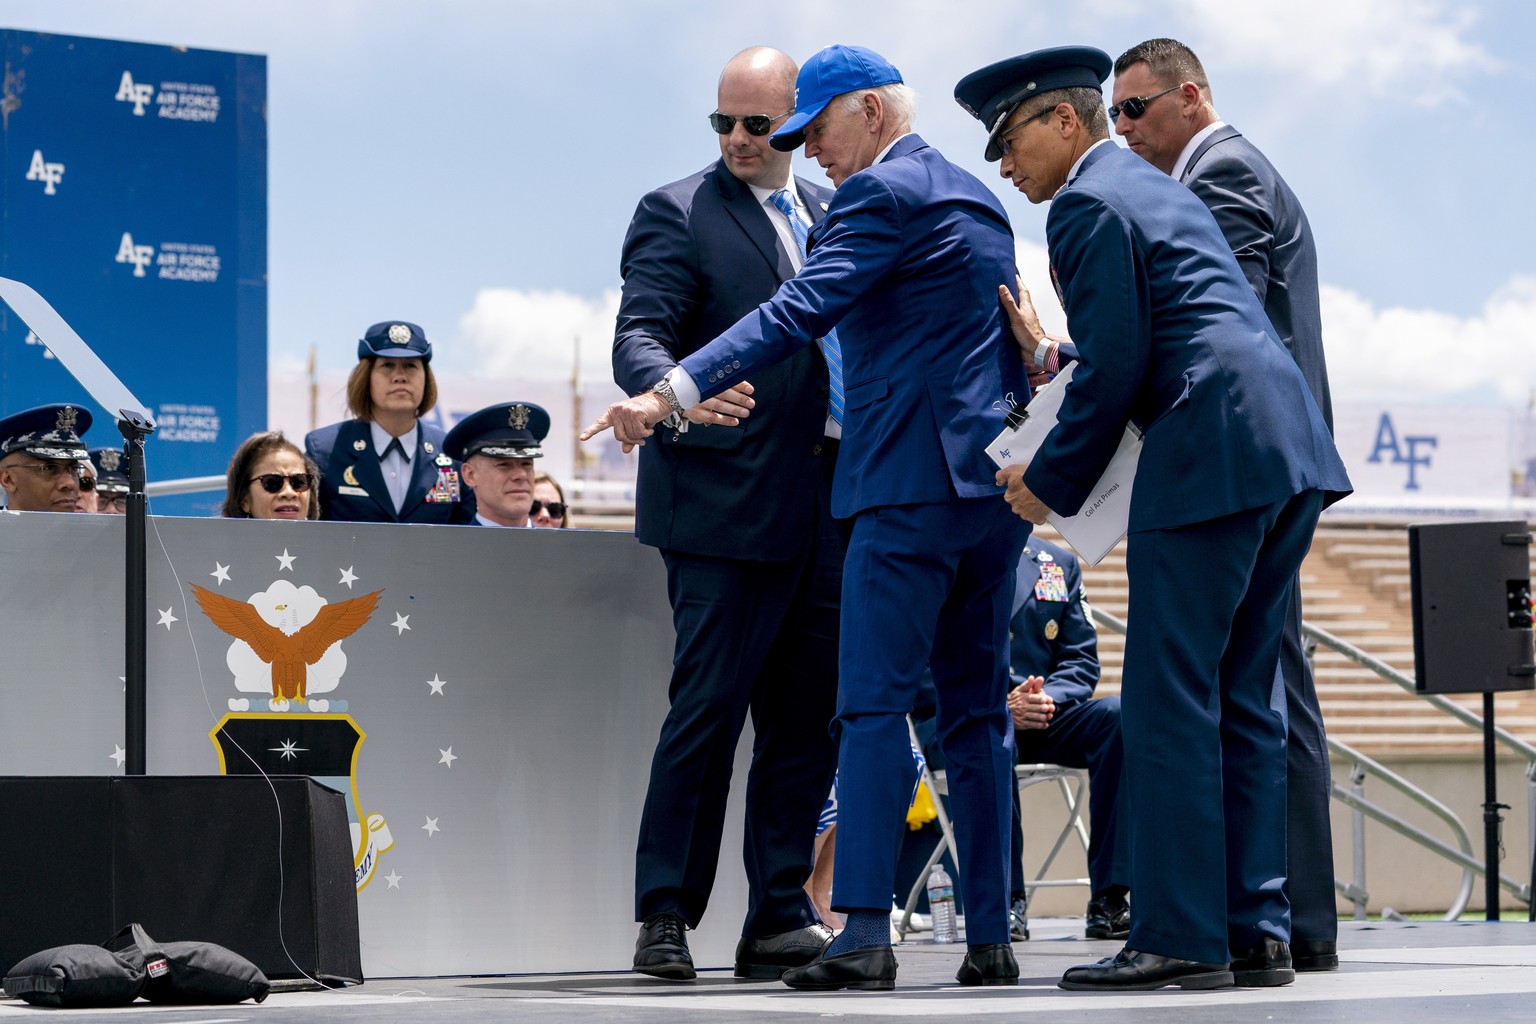 President Joe Biden points to sandbags after falling on stage during the 2023 United States Air Force Academy Graduation Ceremony at Falcon Stadium, Thursday, June 1, 2023, at the United States Air Fo ...